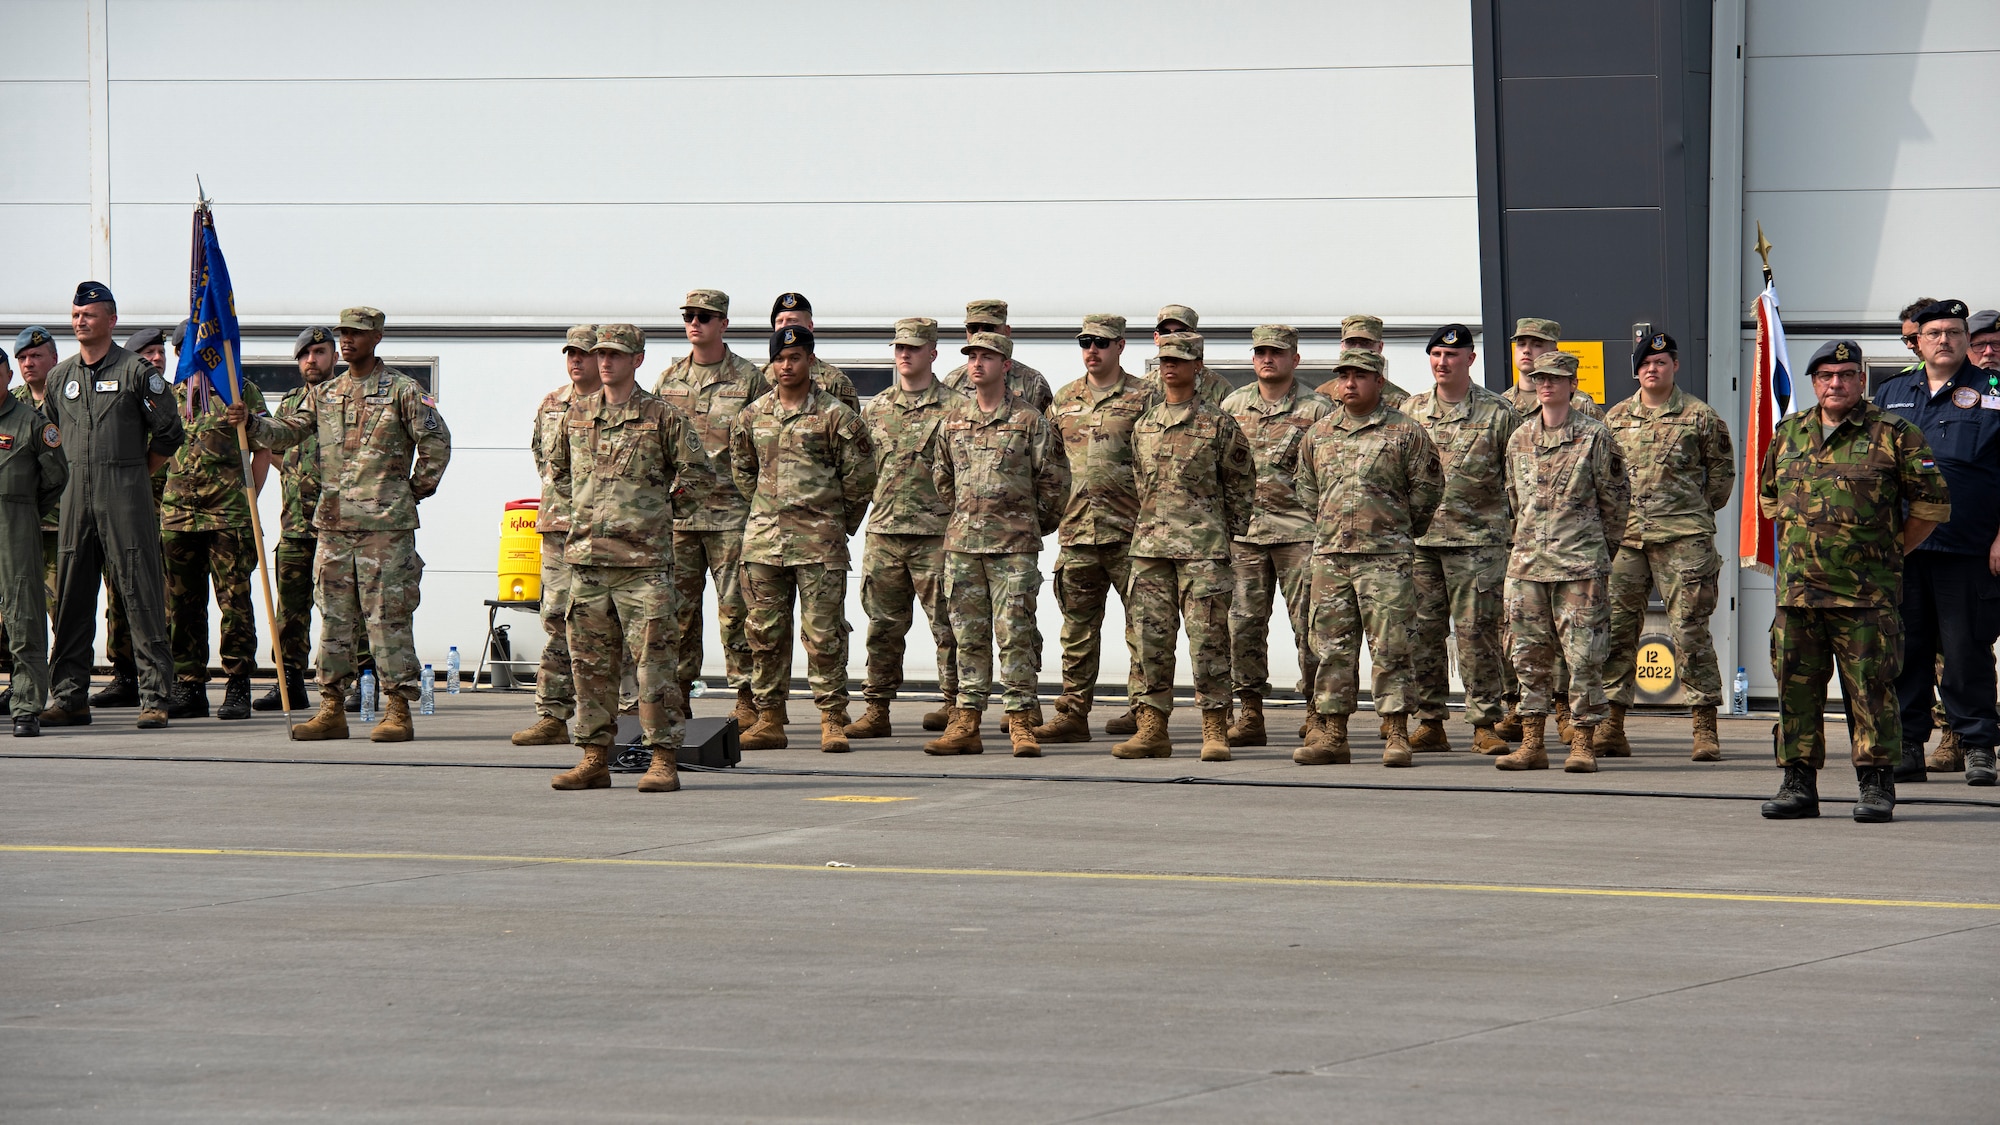 U.S. Airmen participate in a change of command ceremony with members of the Royal Netherlands air force on Volkel Air Base, Netherlands, June 30, 2022. U.S. forces in Europe live, train, and operate with allies and partners from strategic locations across Europe that are critical for continued collaboration and NATO partnerships.